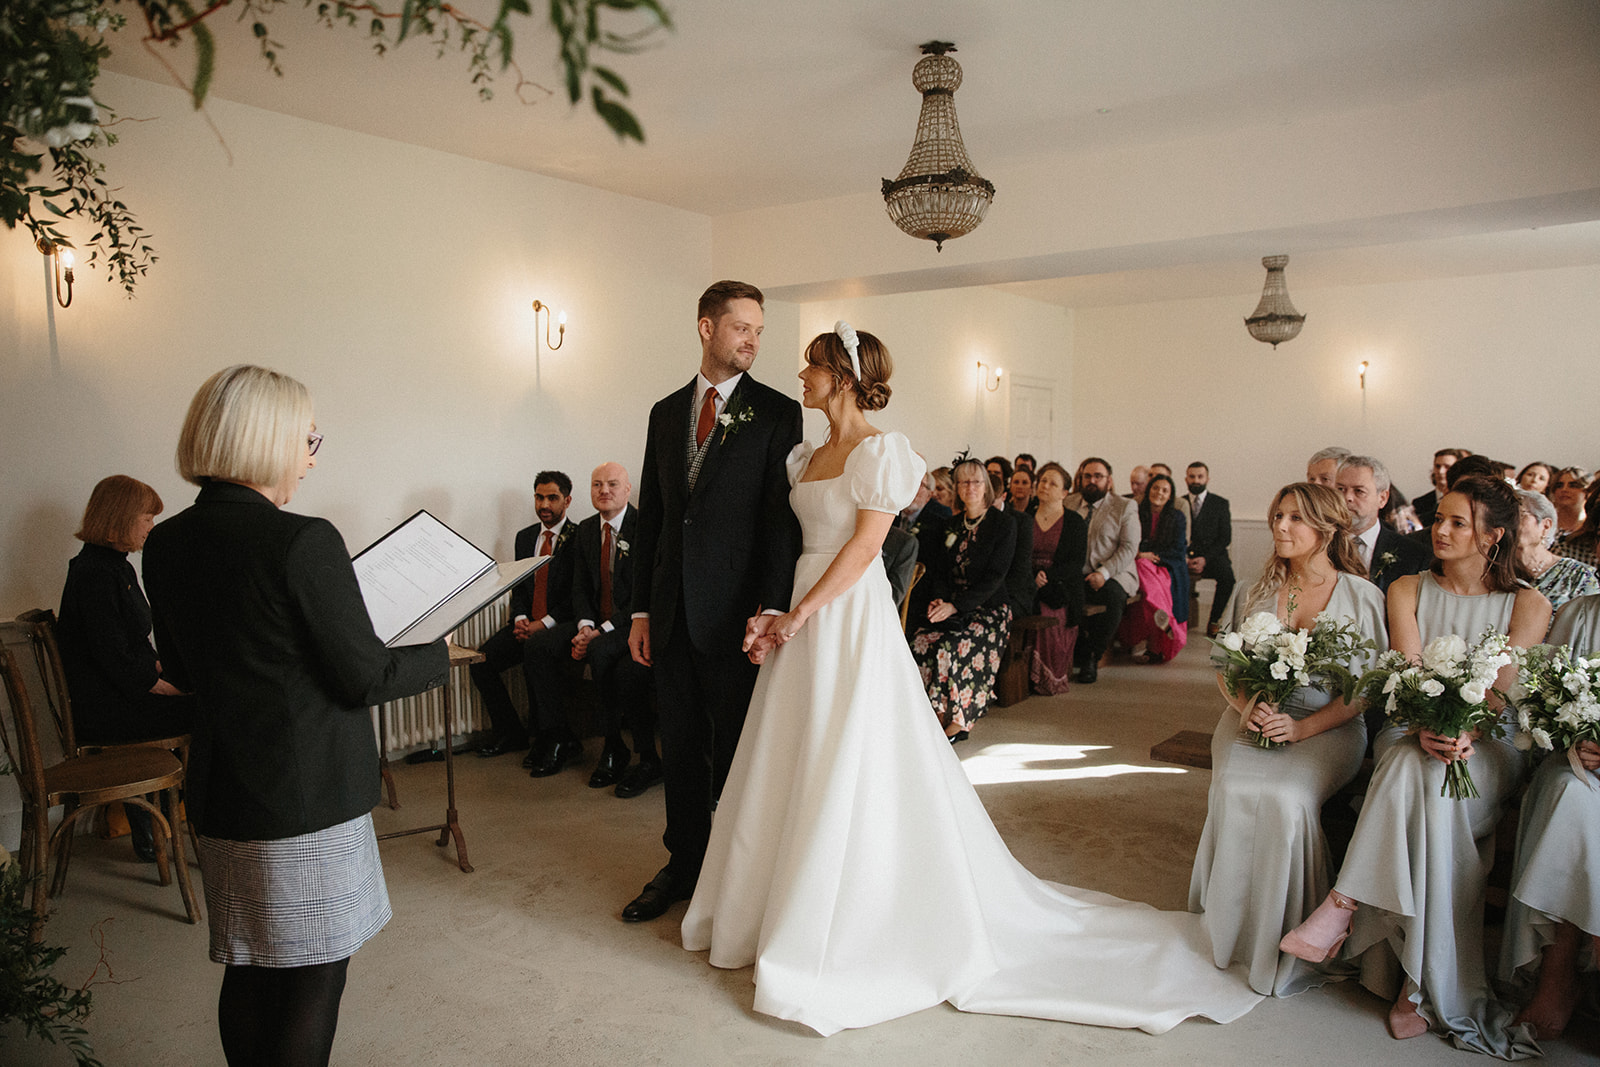 Aswarby Rectory wedding, Sassi Holford bride in puff sleeve dress